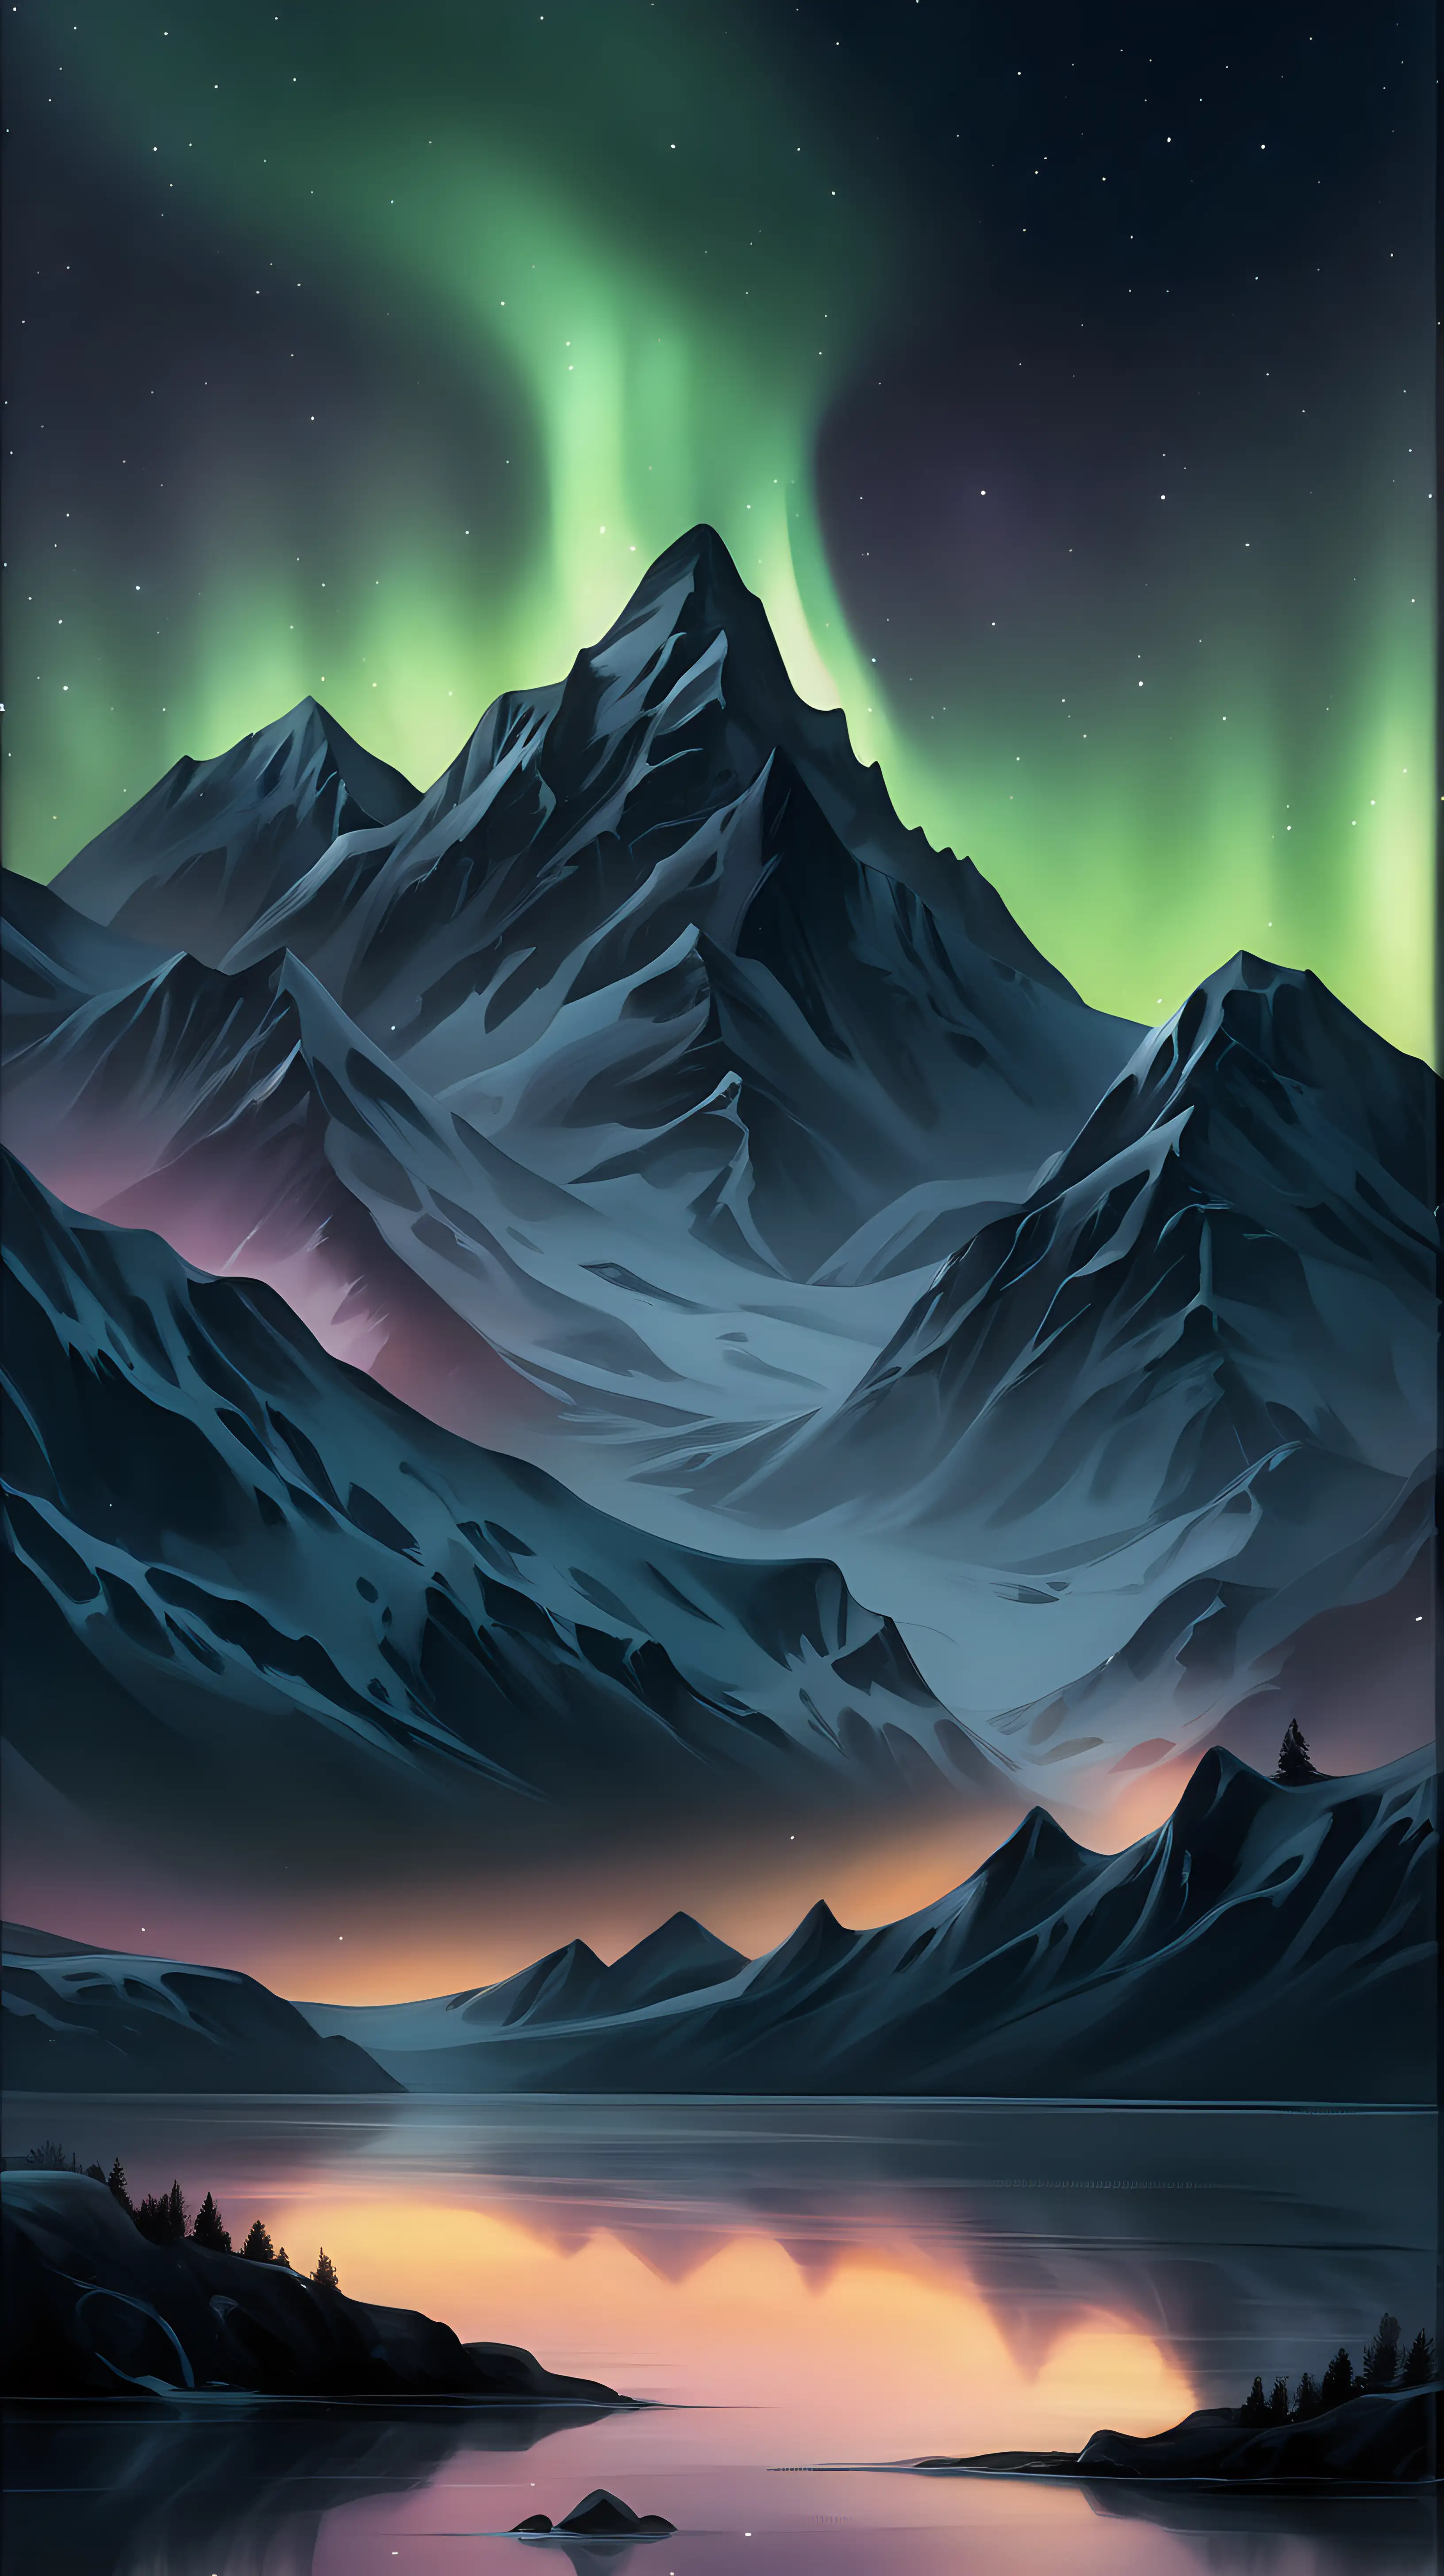 northern light scene with black silhouette of mountain scape